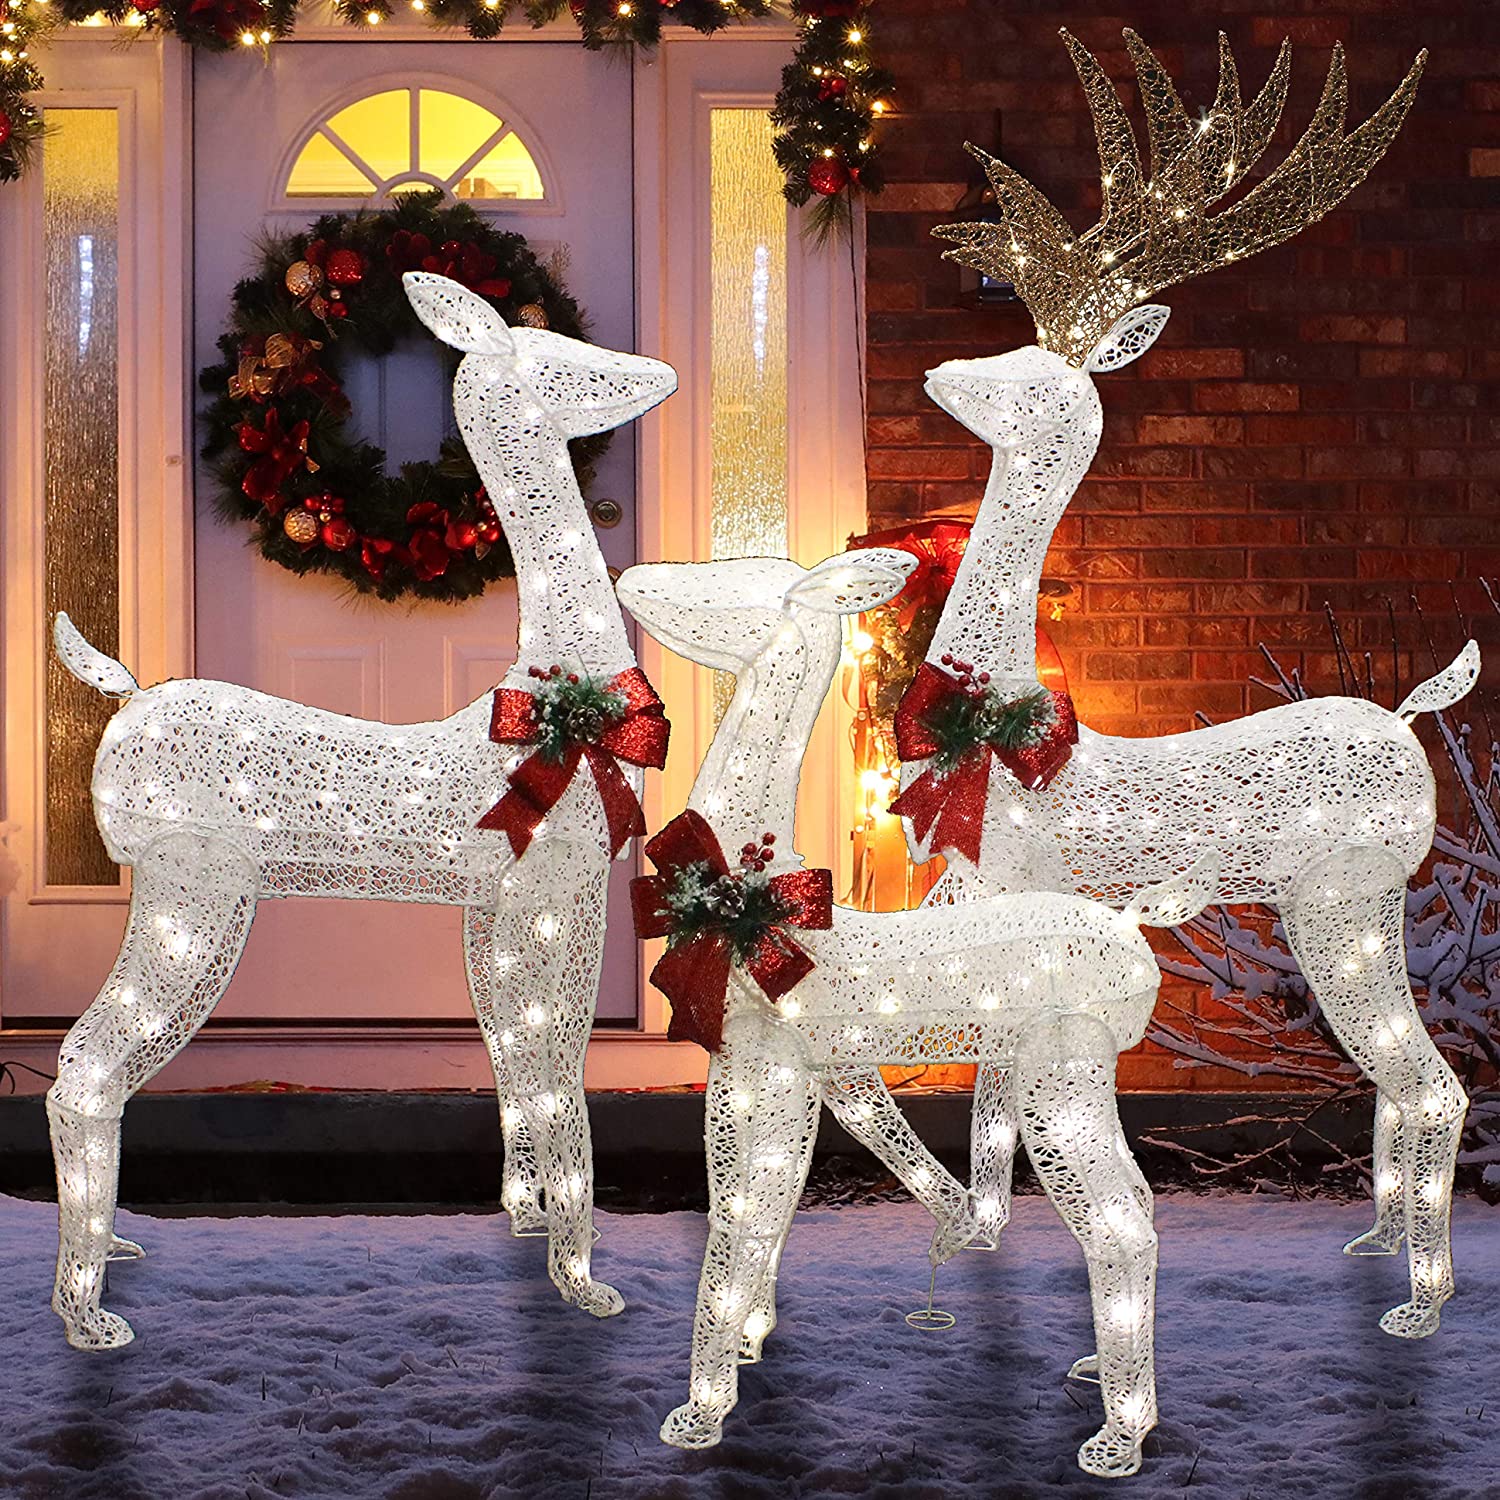 Joiedomi 60-in Reindeer Yard Decoration with White LED Lights at